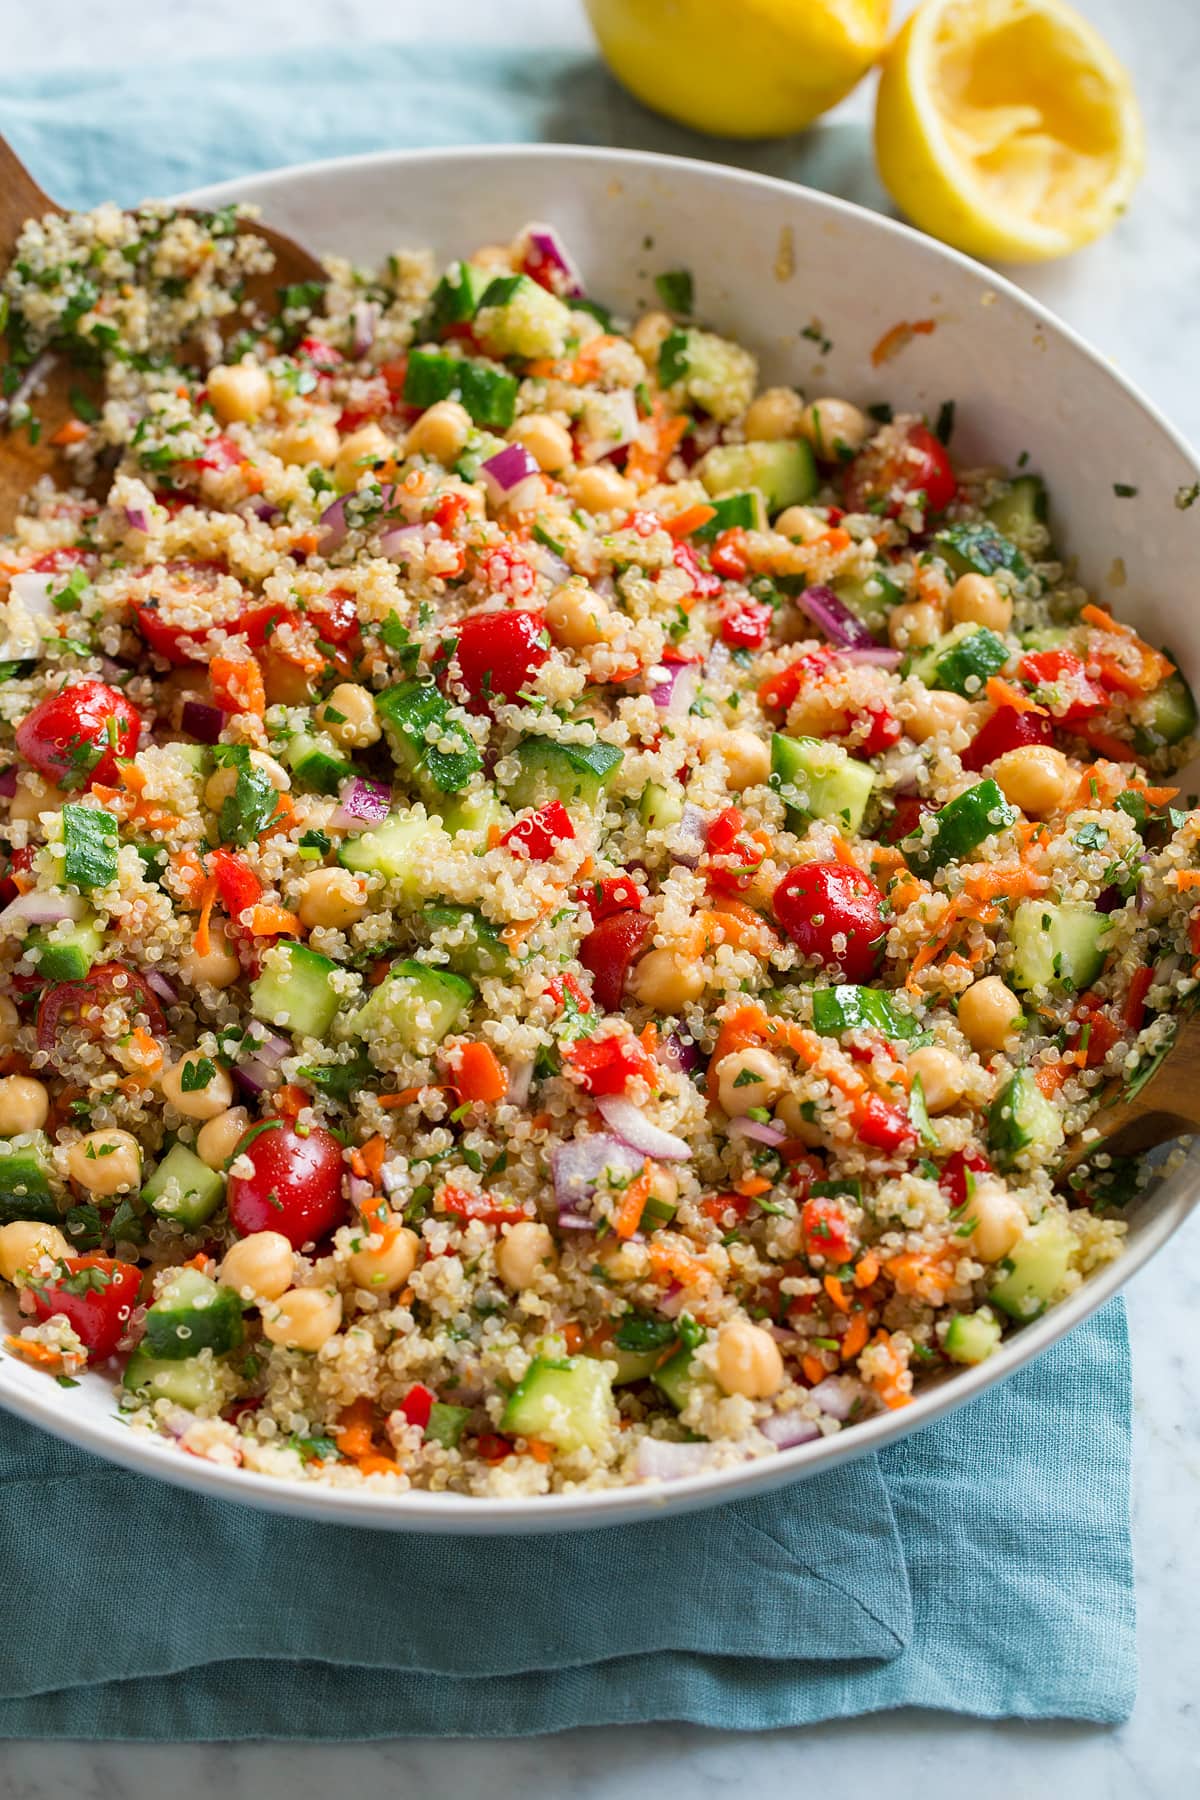 Healthy quinoa salad in a serving bowl. Salad shows quinoa, cucumber, tomatoes, carrots, red onion, chick peas and herbs.